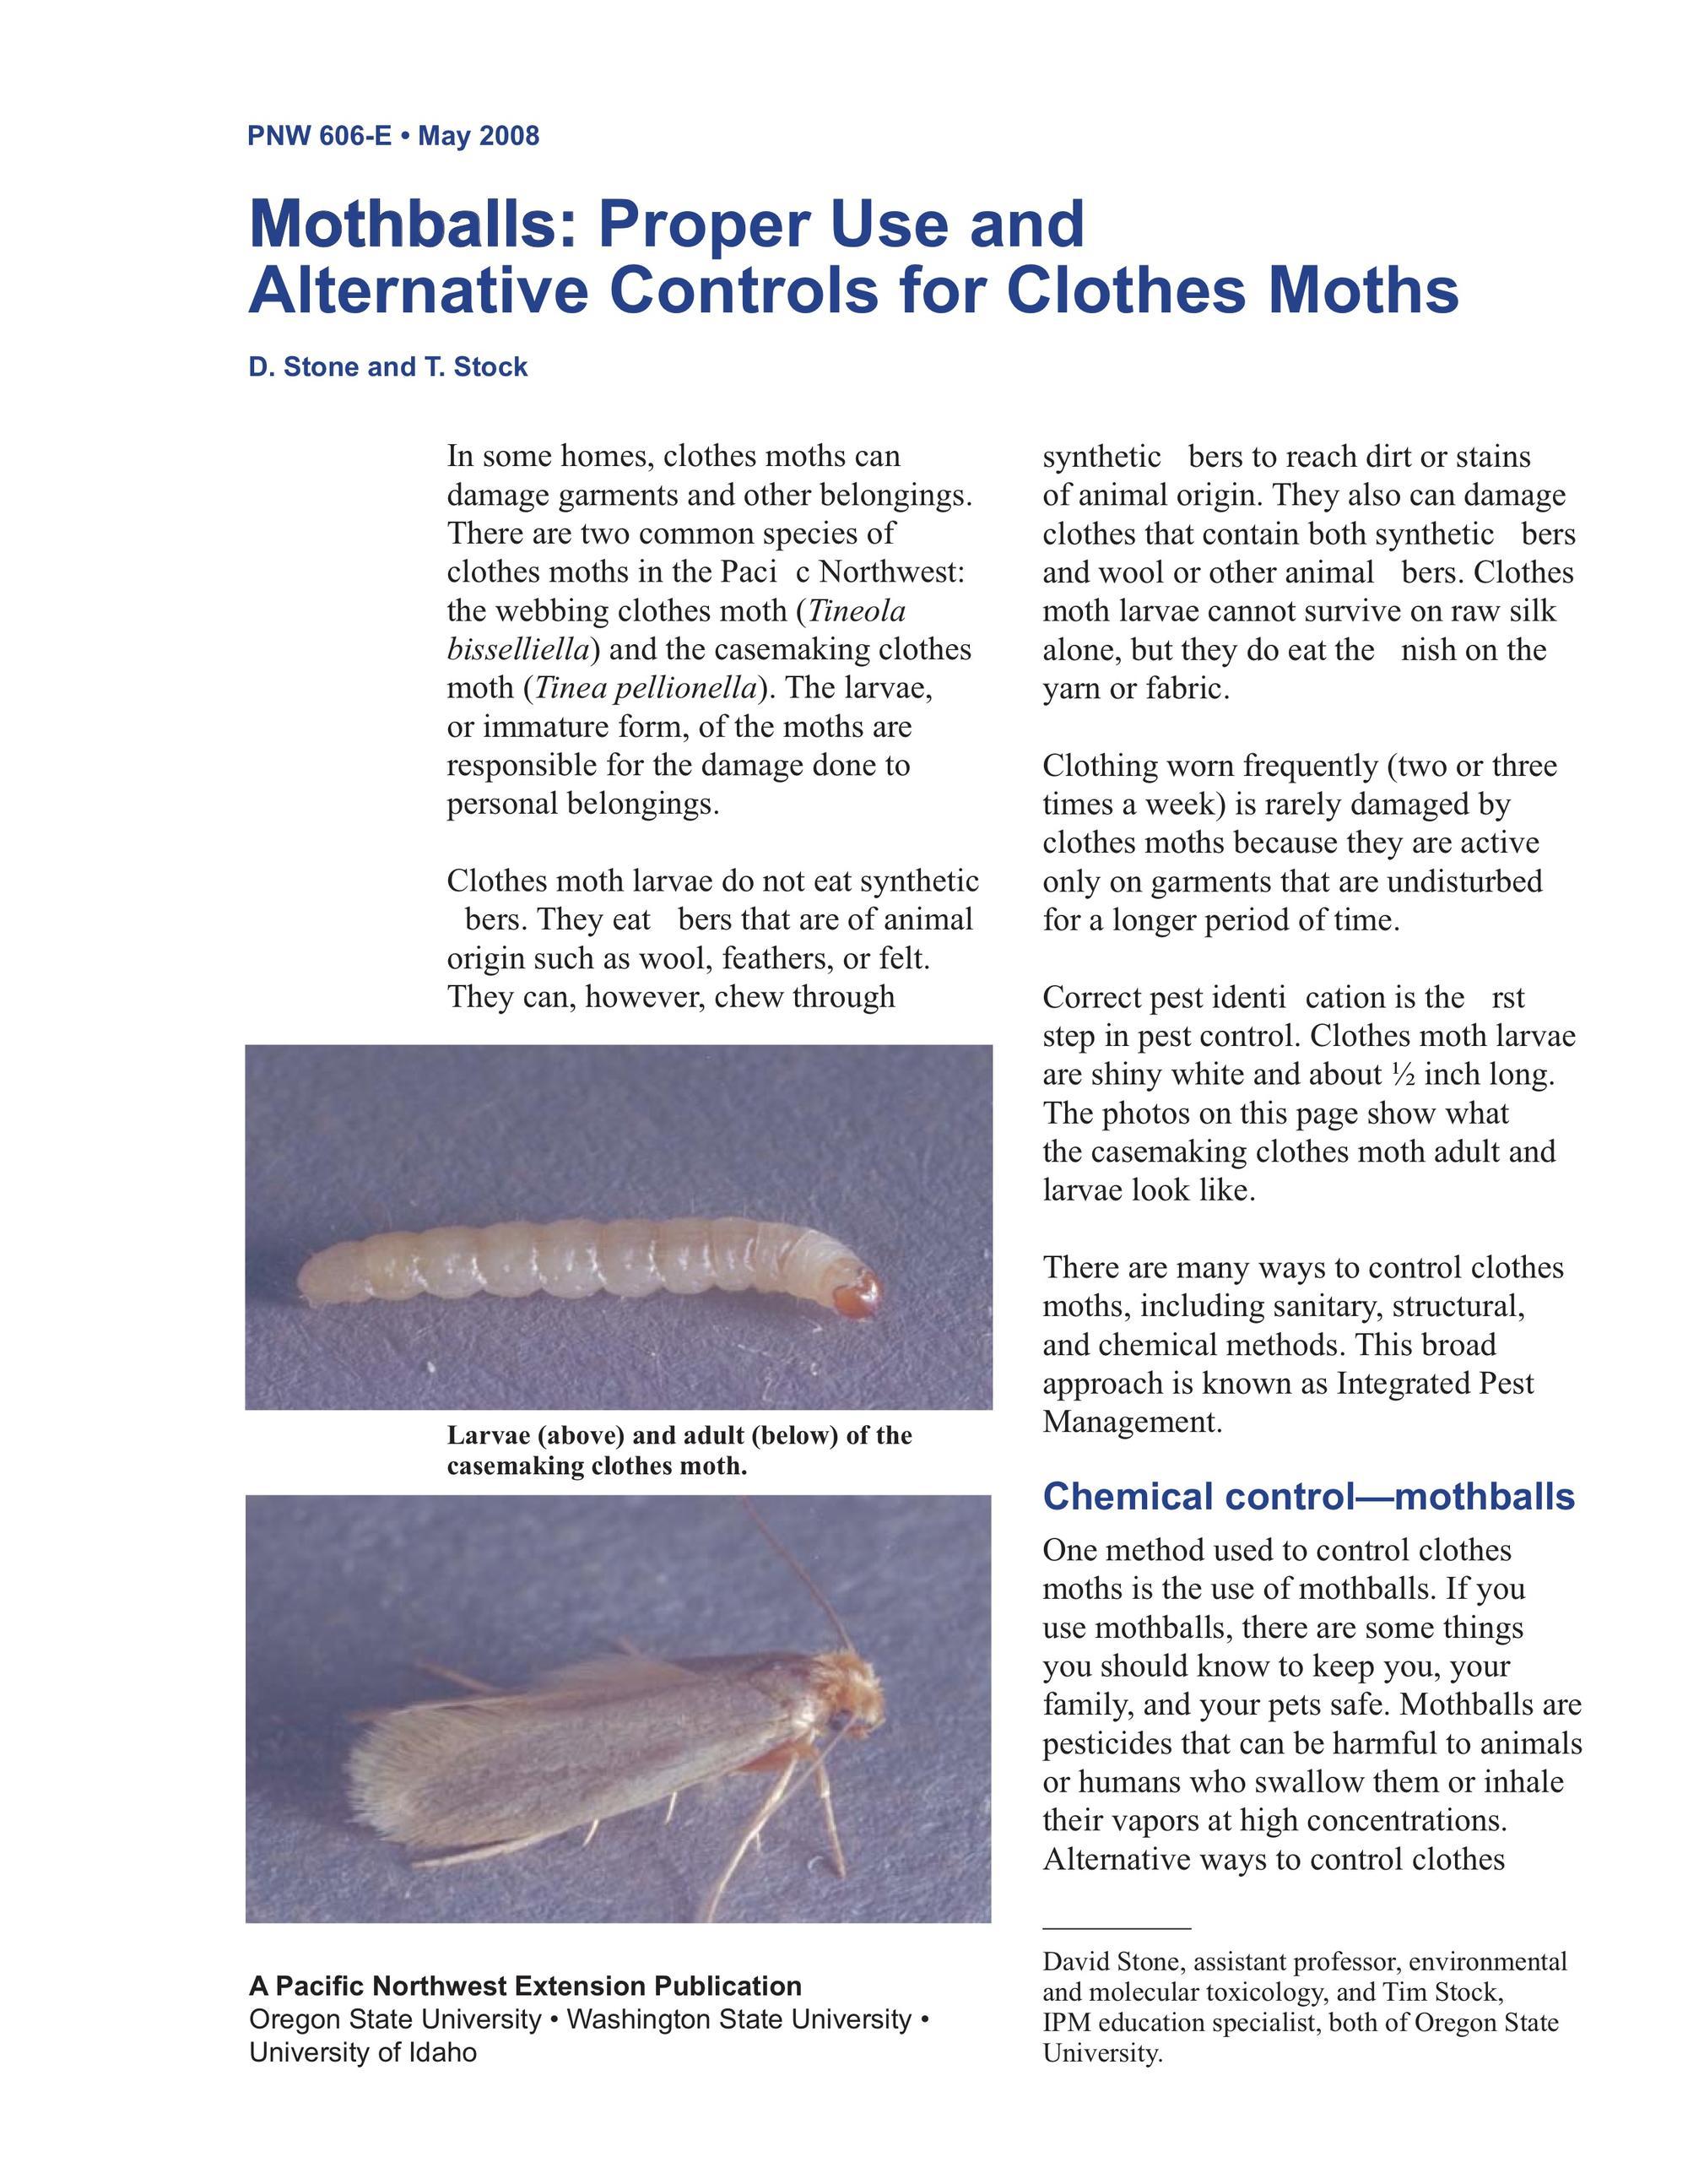 How To Control Clothes Moths